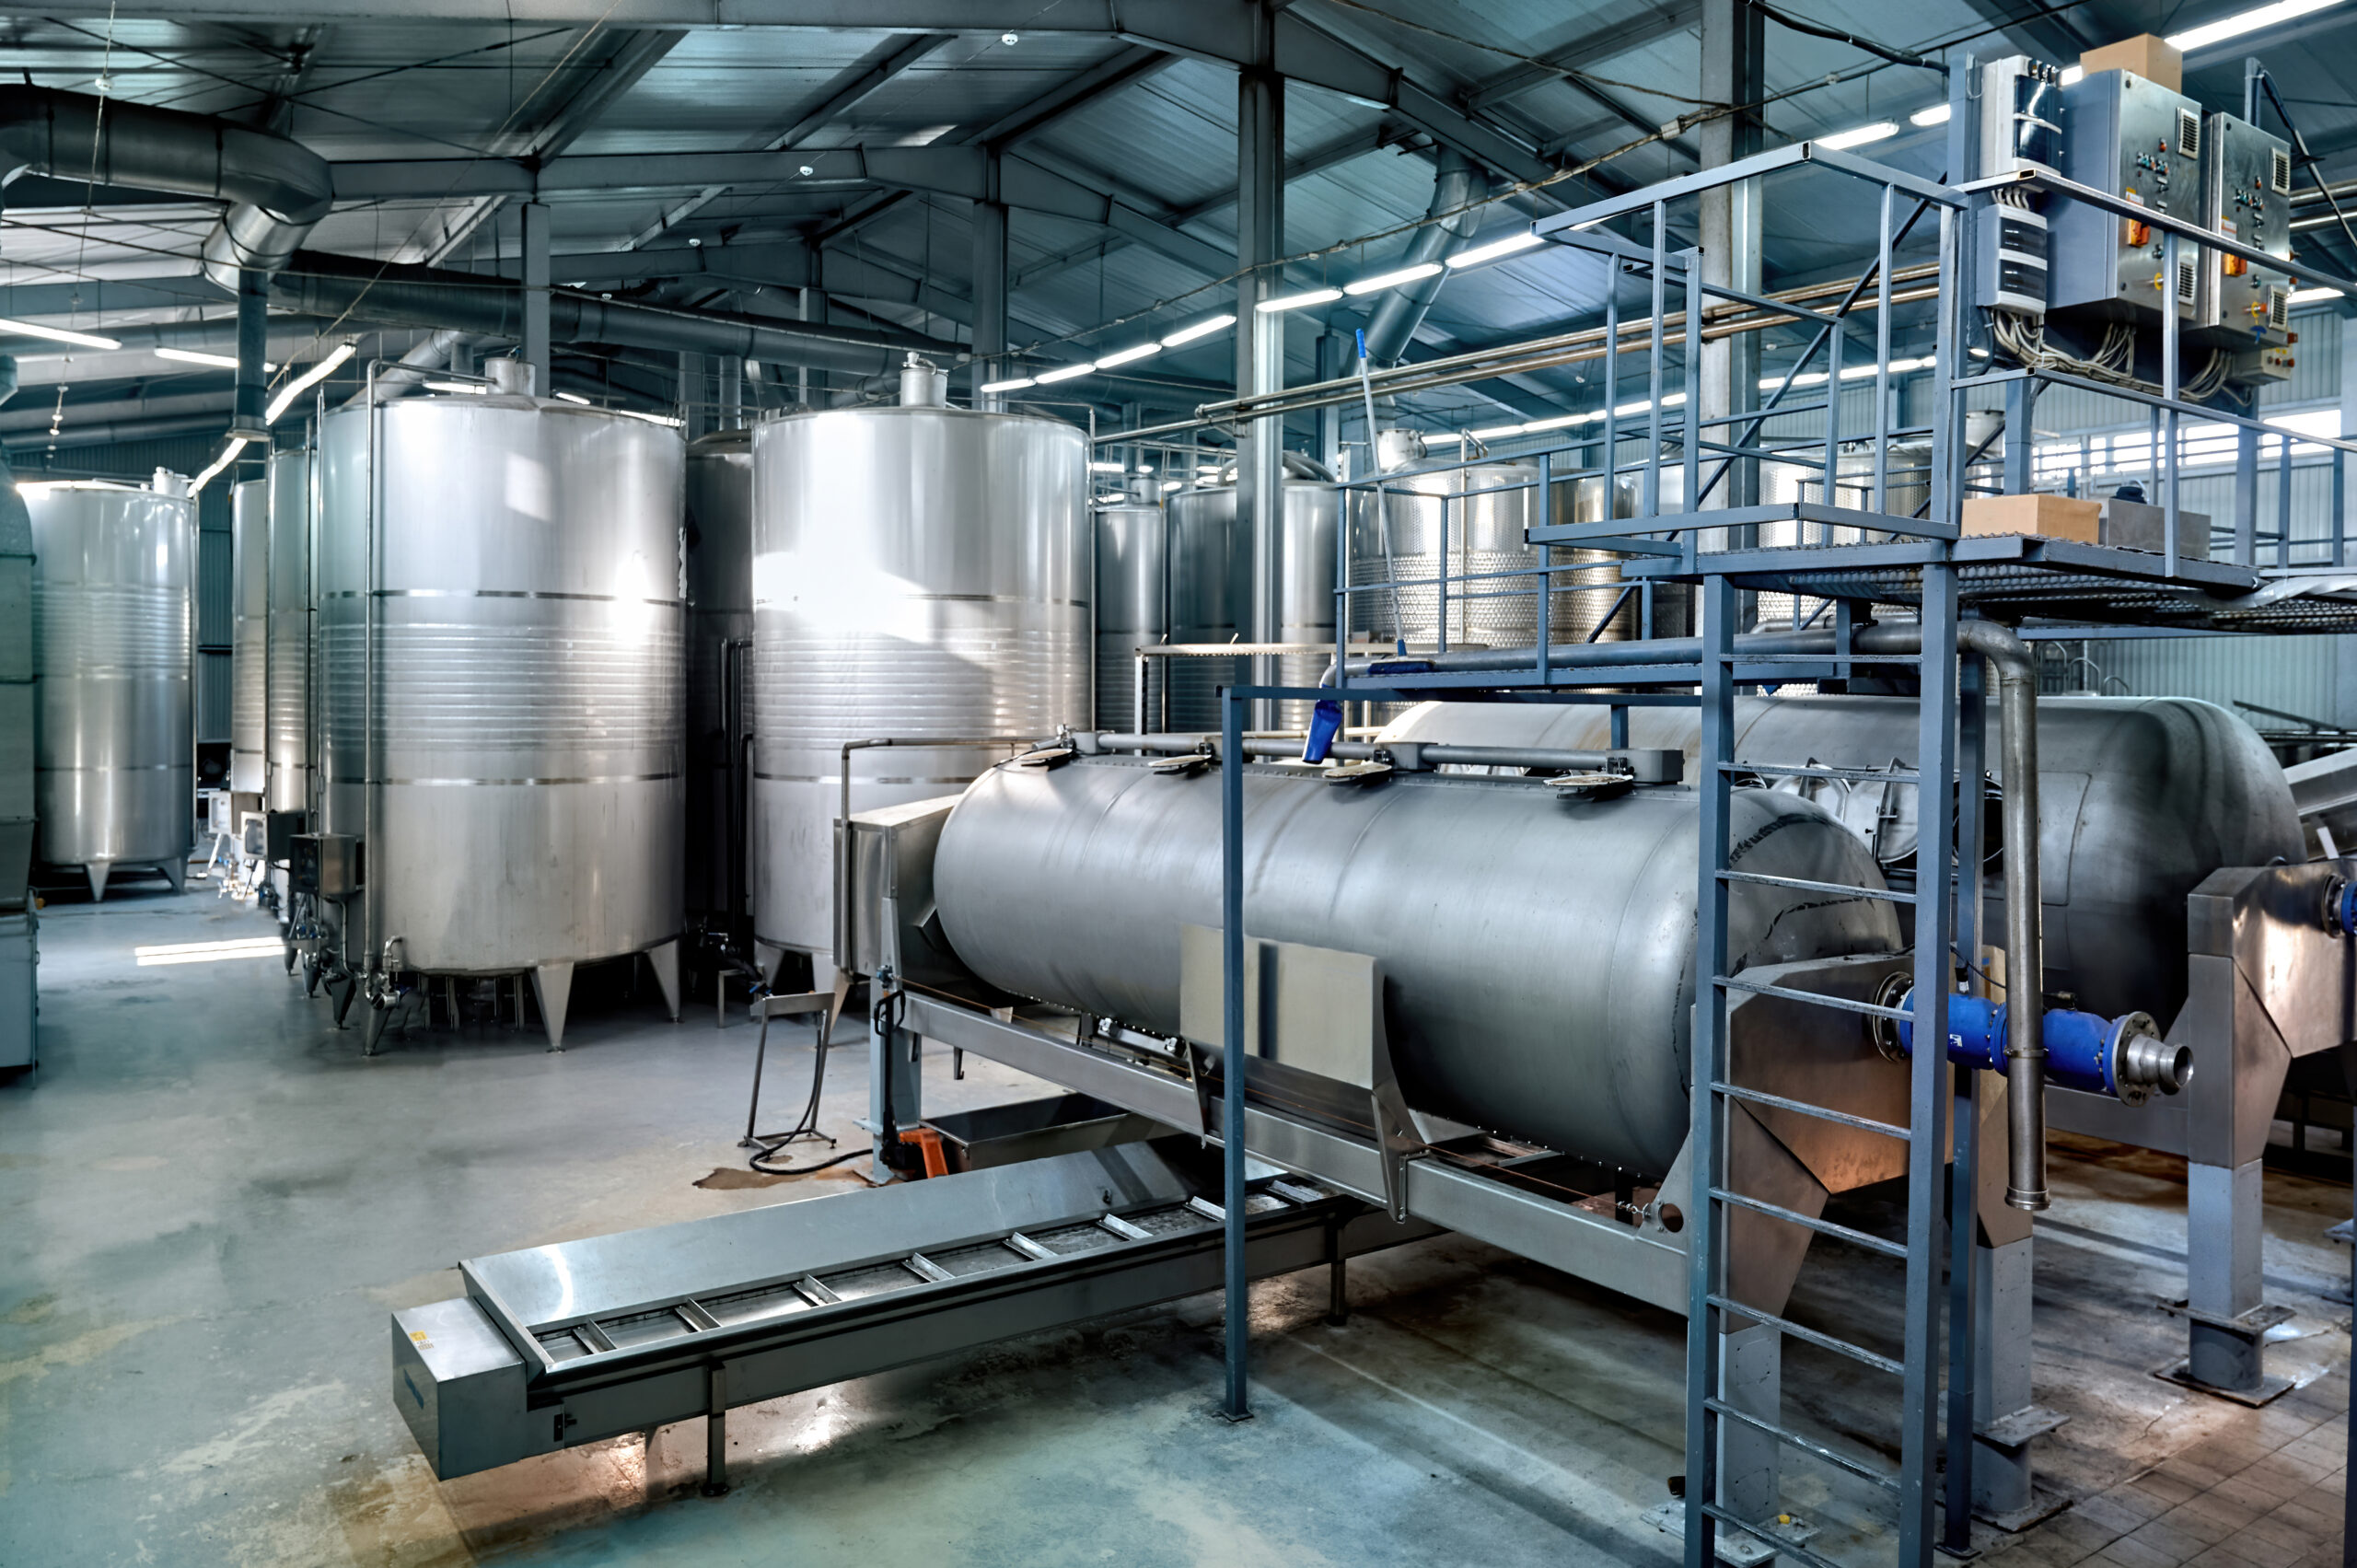 What You Need to Know About Steel Tank Fabrication Standards and Regulations